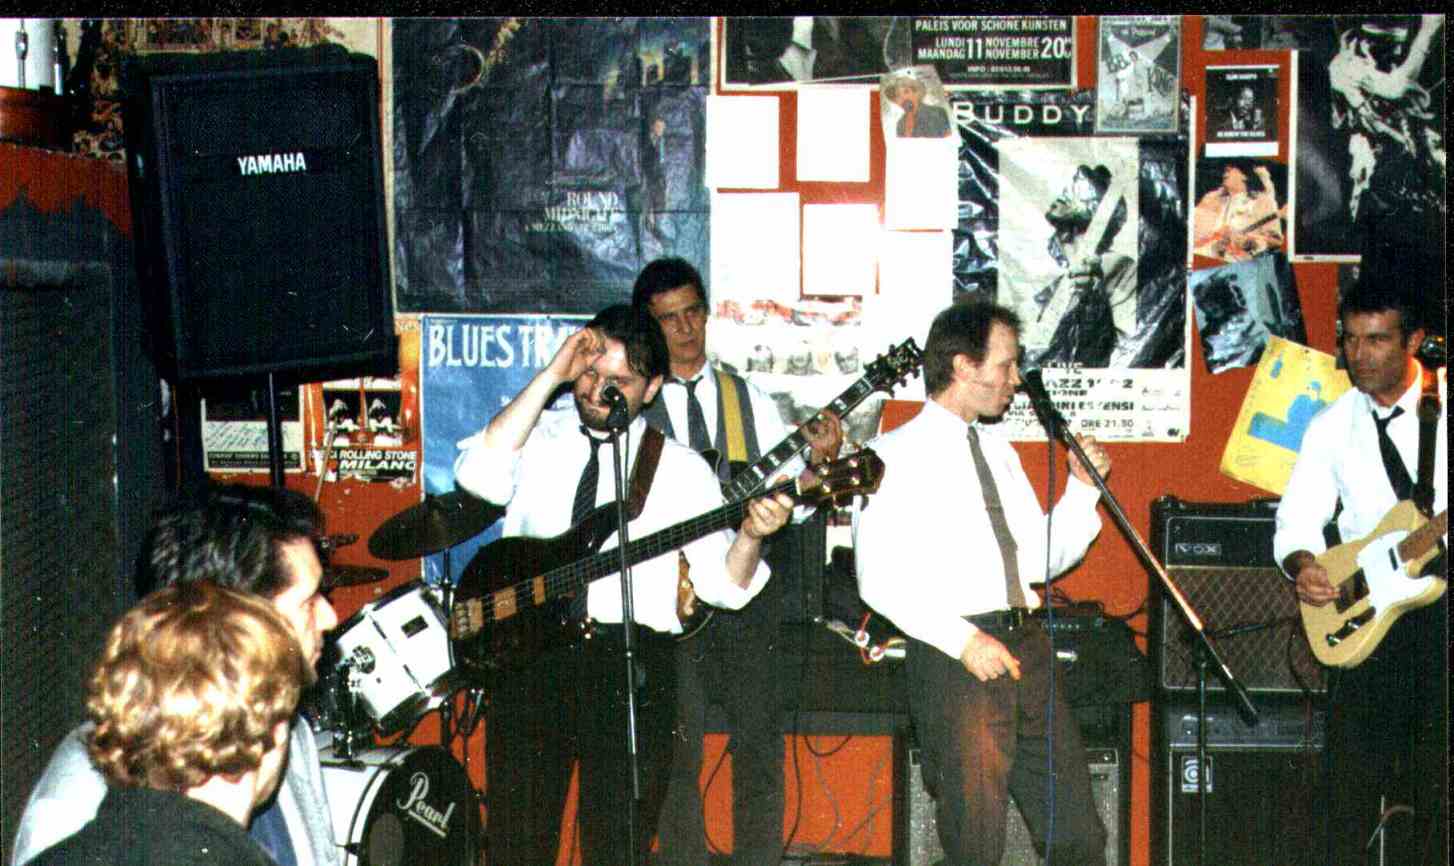 The Mersey Sect